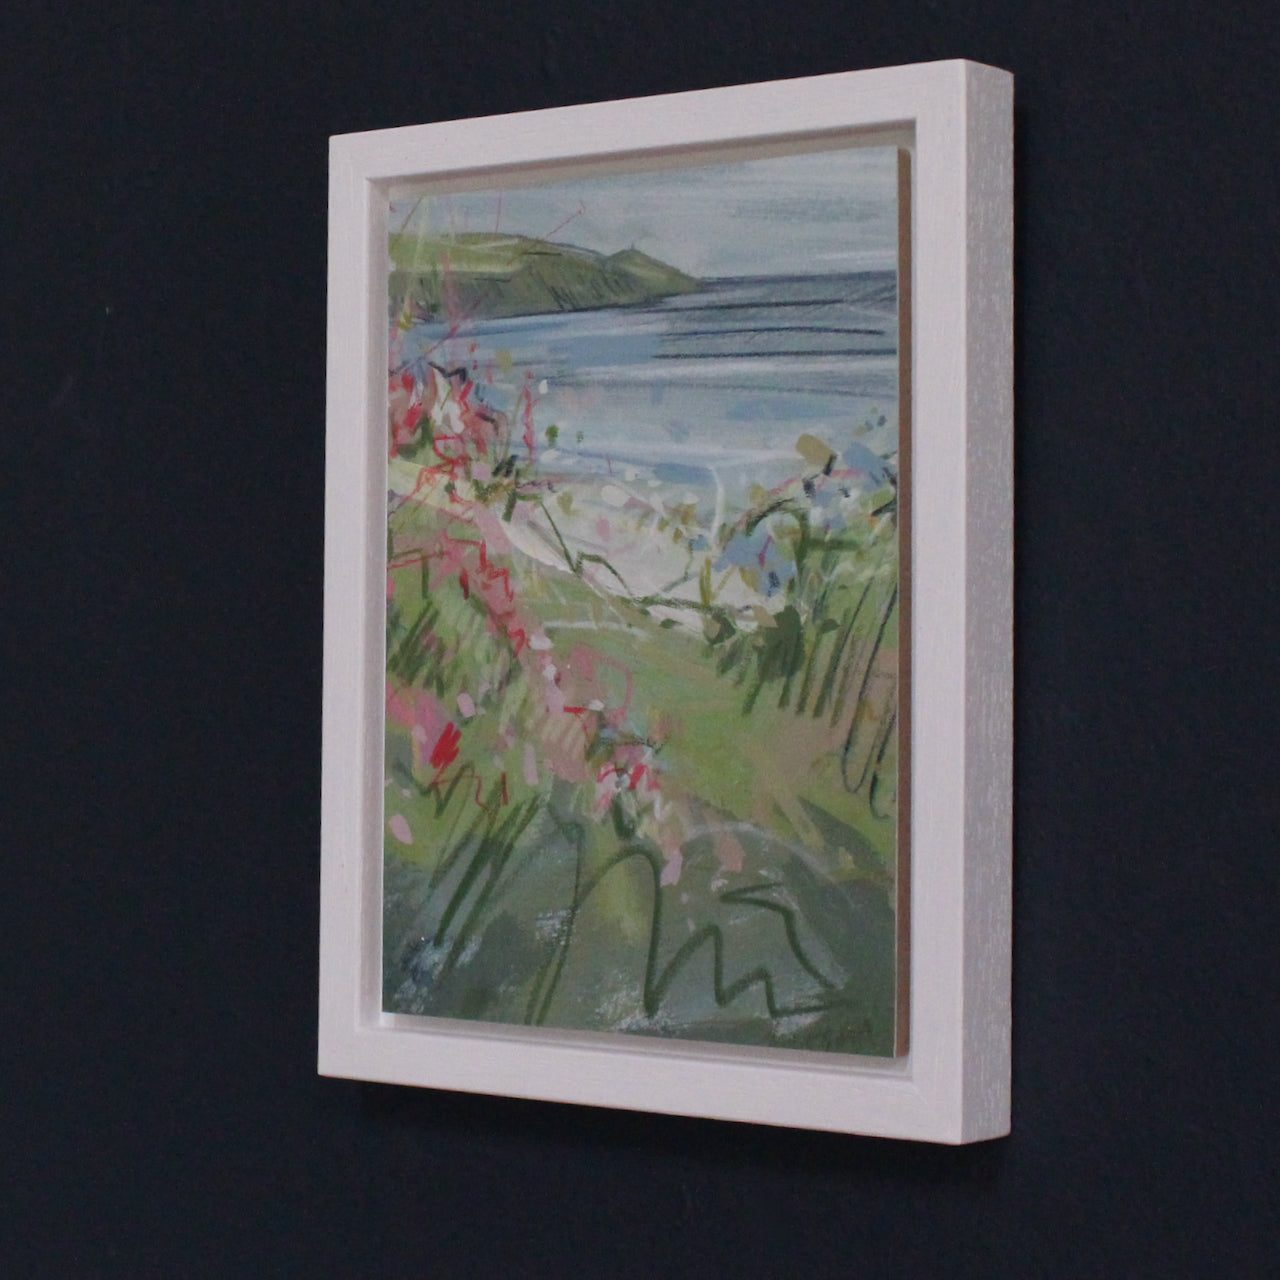 Imogen Bone, Cornish artist small painting of Rame Head in south south Cornwall the sea is blue with hints of white,  the peninsula and the hedgerow is green with pink flowers .